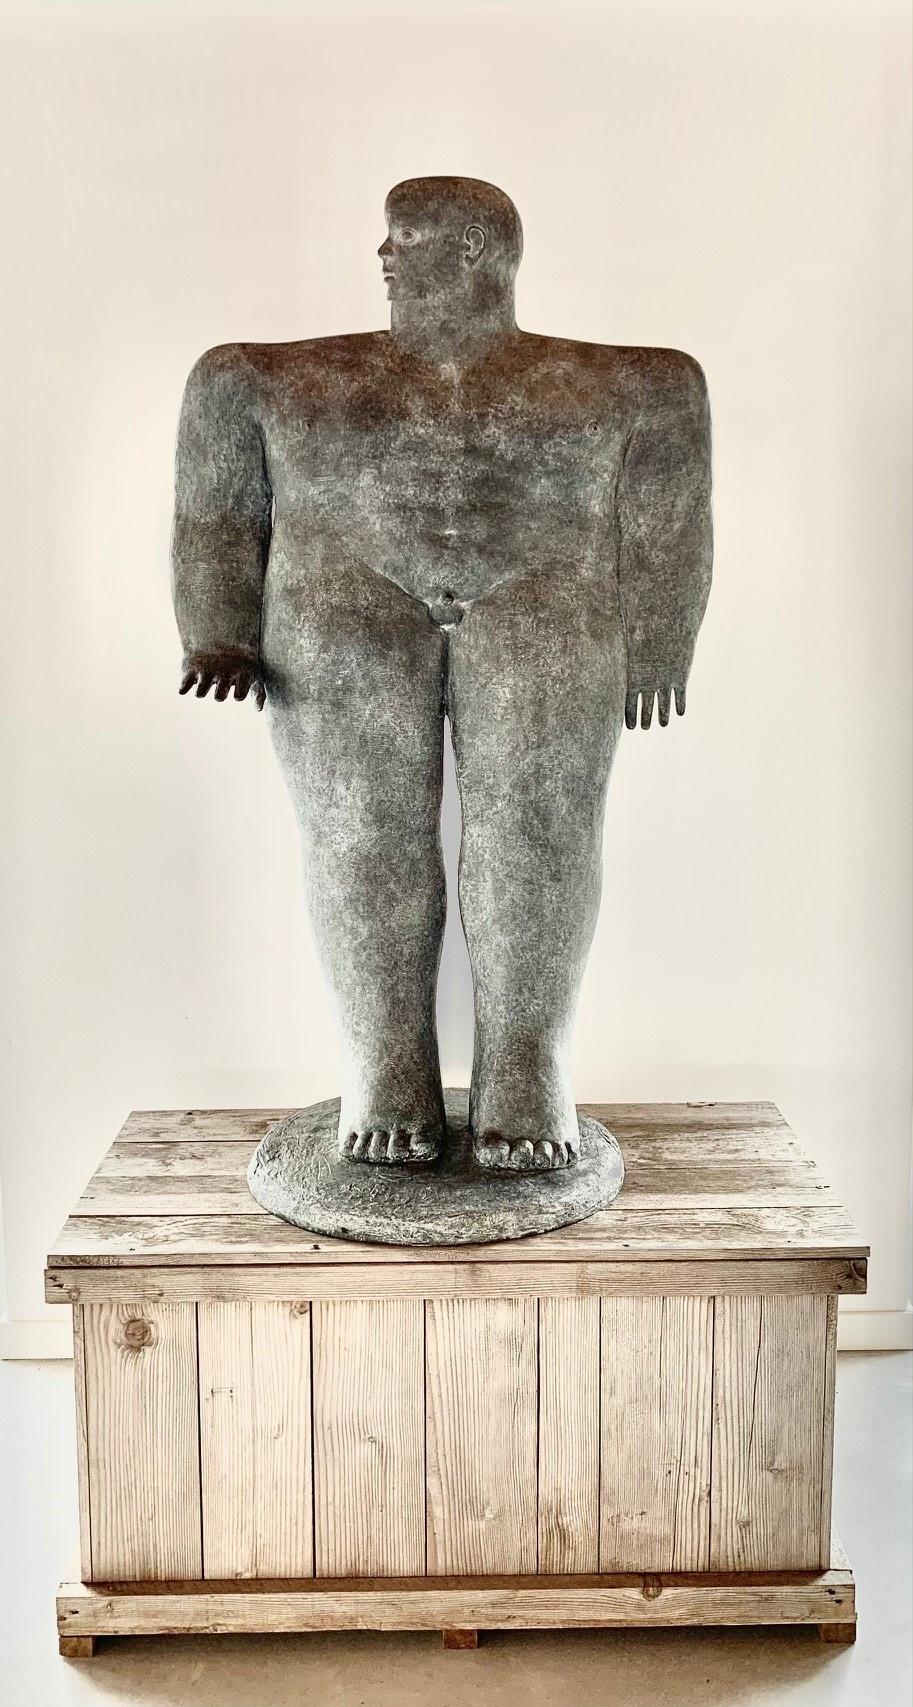 De Jongeling Youngster Young Man Bronze Sculpture Big Outside In Stock 

KOBE, pseudonym of Jacques Saelens, was a Belgian artist (Kortrijk, Belgium 1950 – Saint-Julien (Var), France 2014).

He combined the broad with sophistication. Two themes